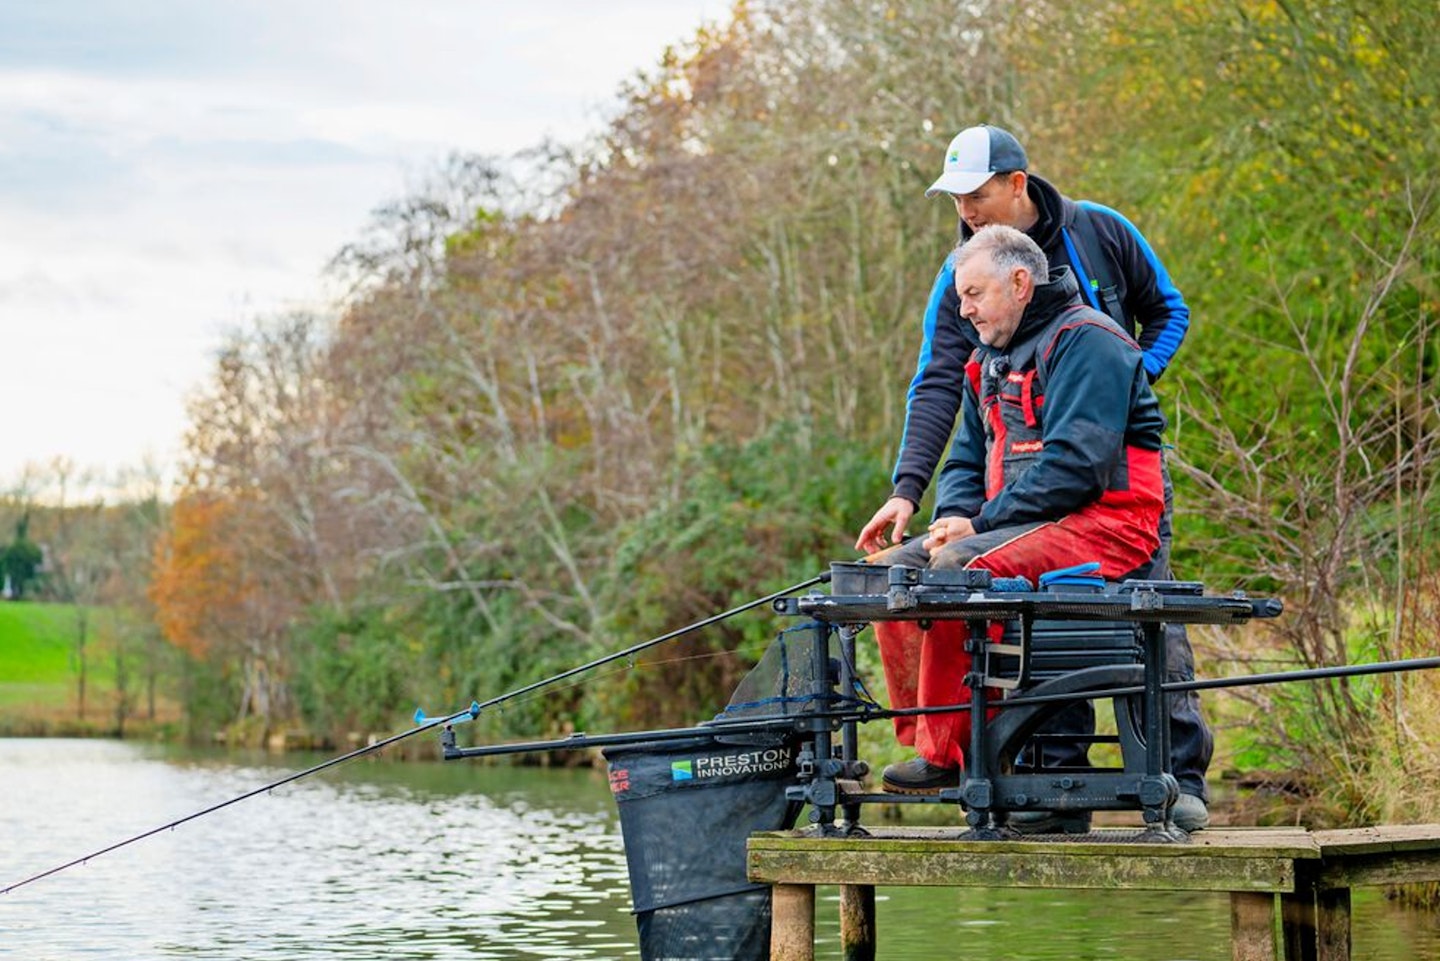 It isn’t every day that you get to go fishing with an England international angler